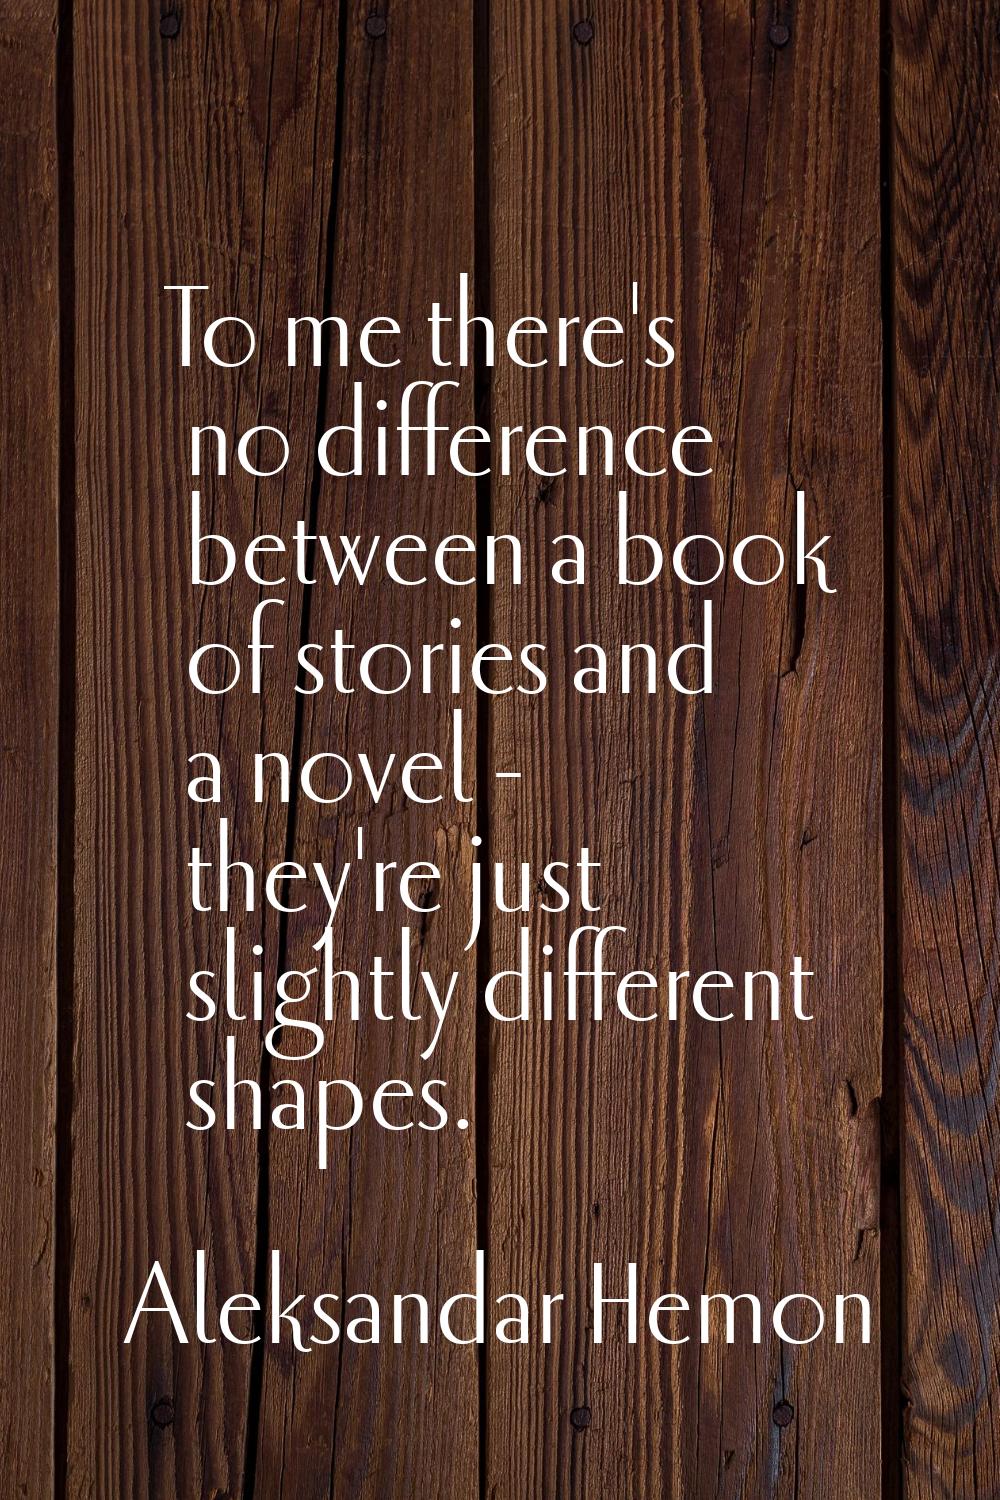 To me there's no difference between a book of stories and a novel - they're just slightly different